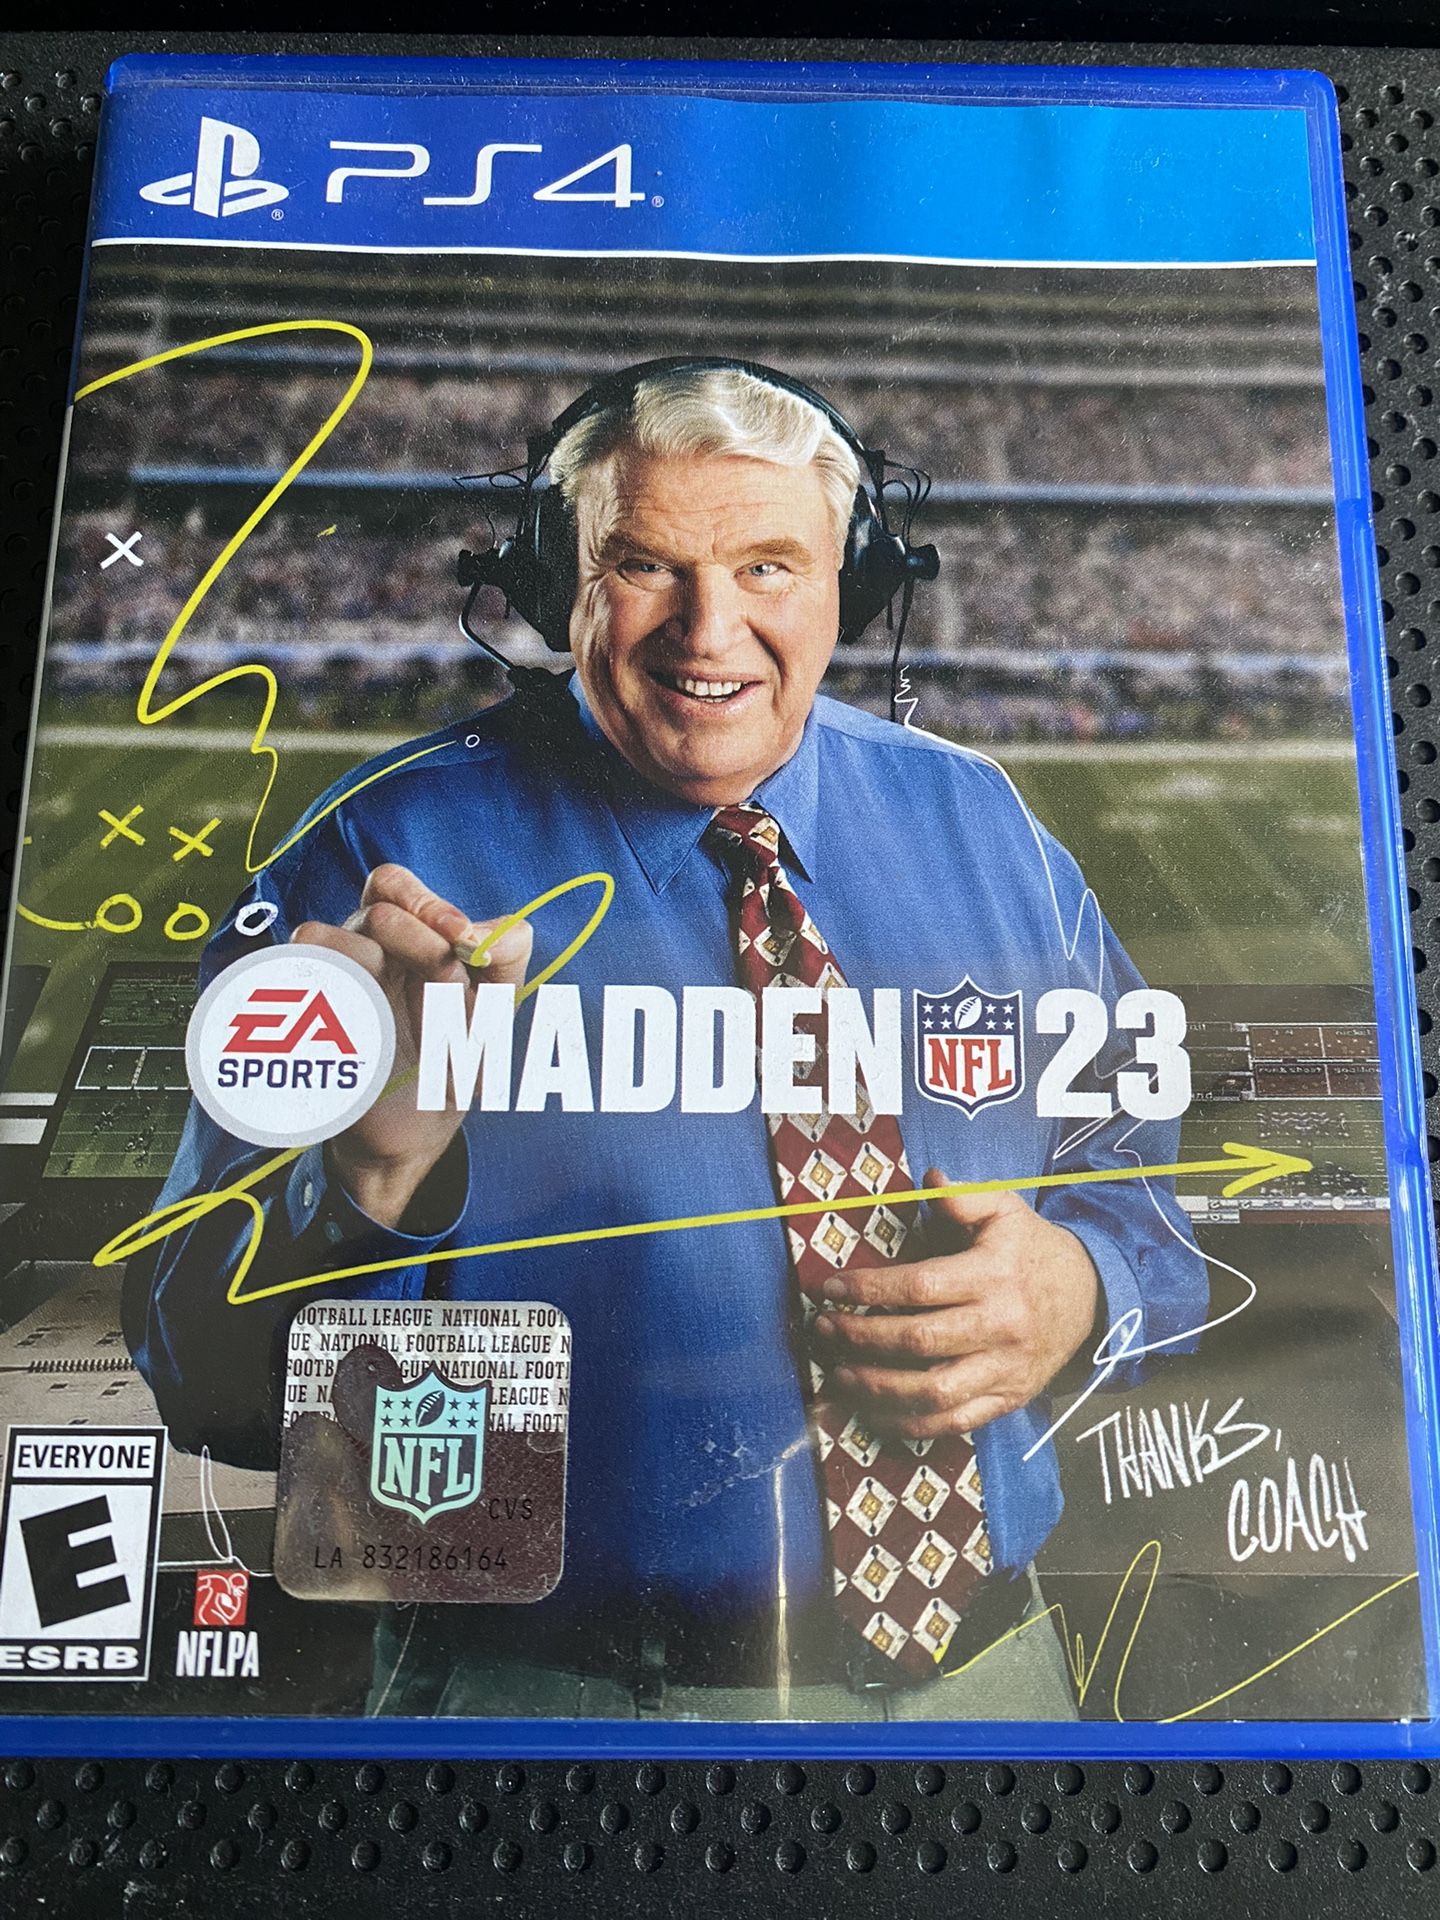 Madden23 PS4 for Sale in Jersey City, NJ - OfferUp